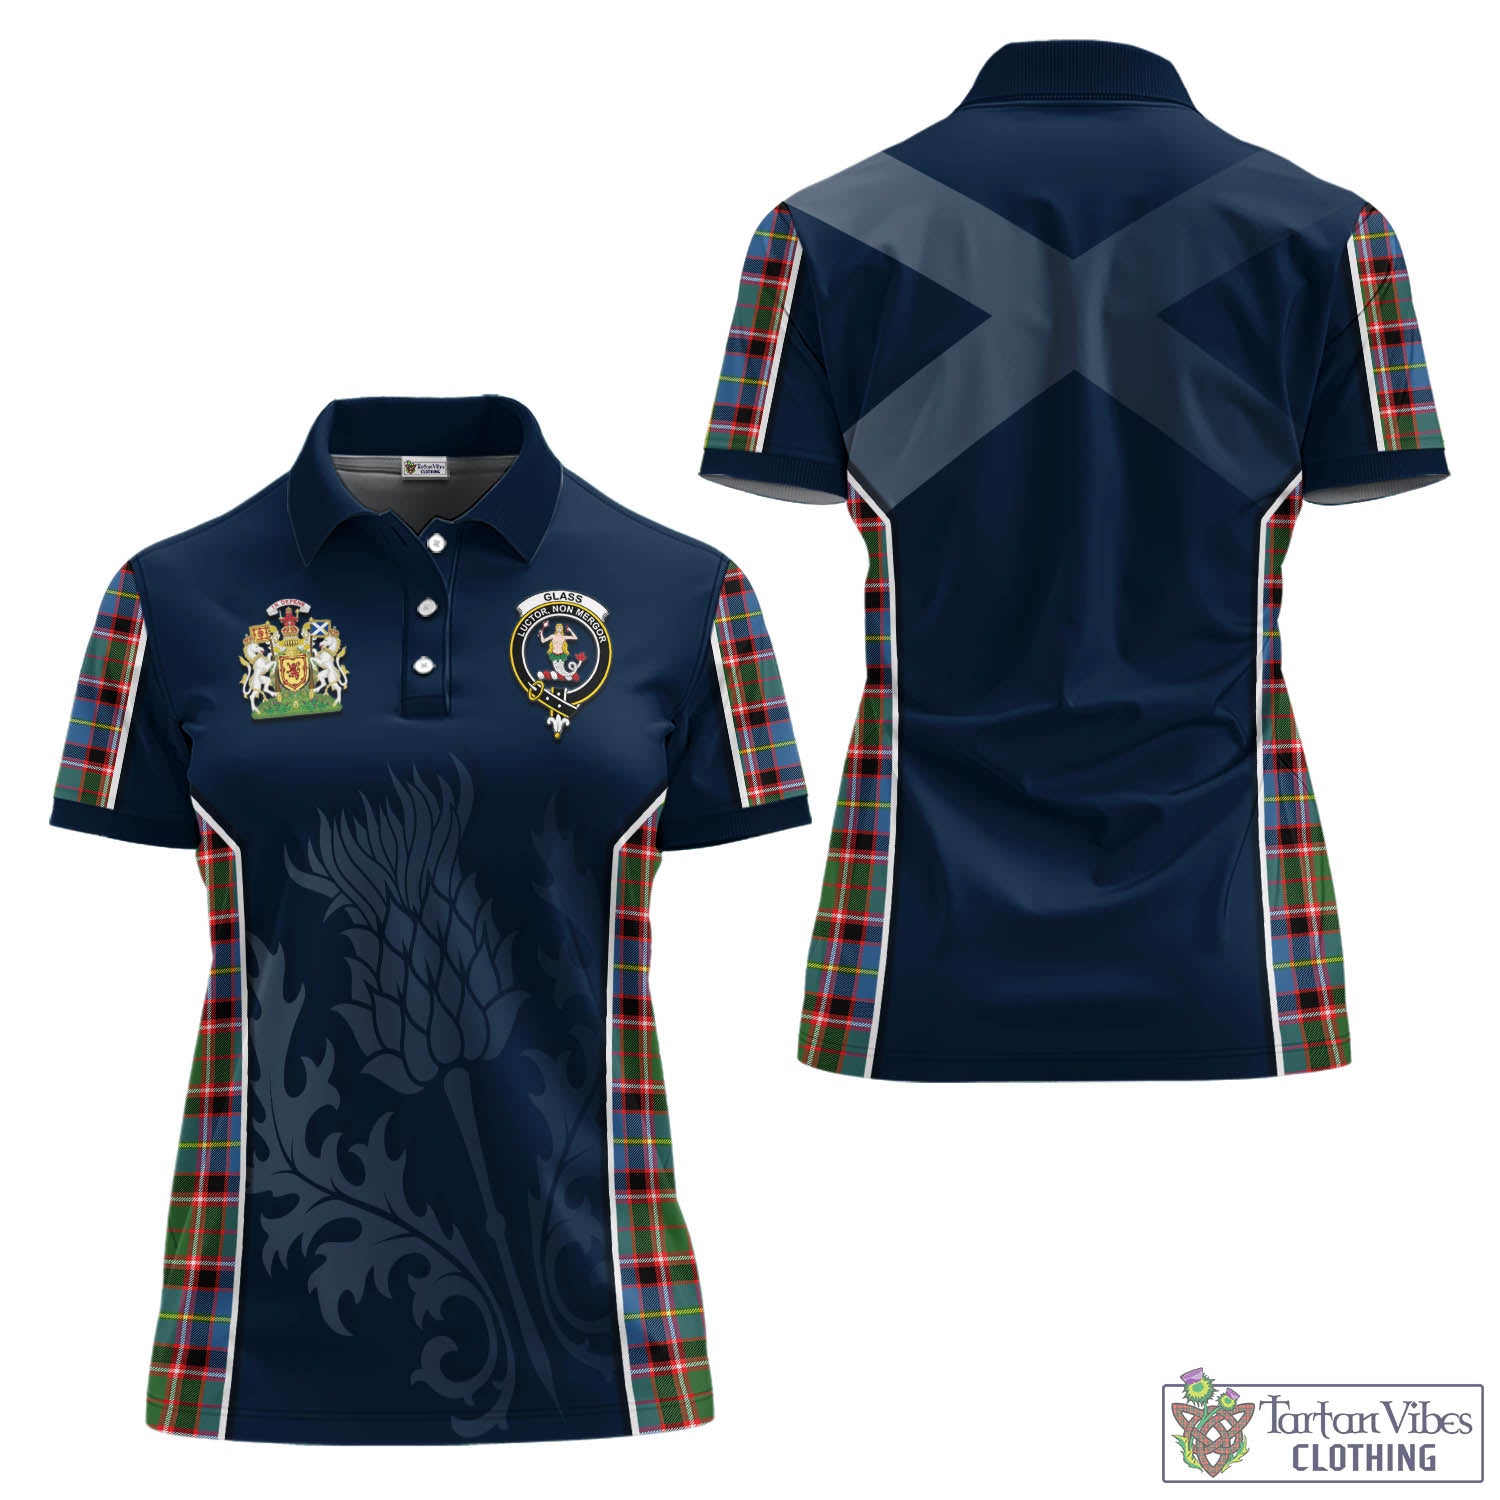 Tartan Vibes Clothing Glass Tartan Women's Polo Shirt with Family Crest and Scottish Thistle Vibes Sport Style